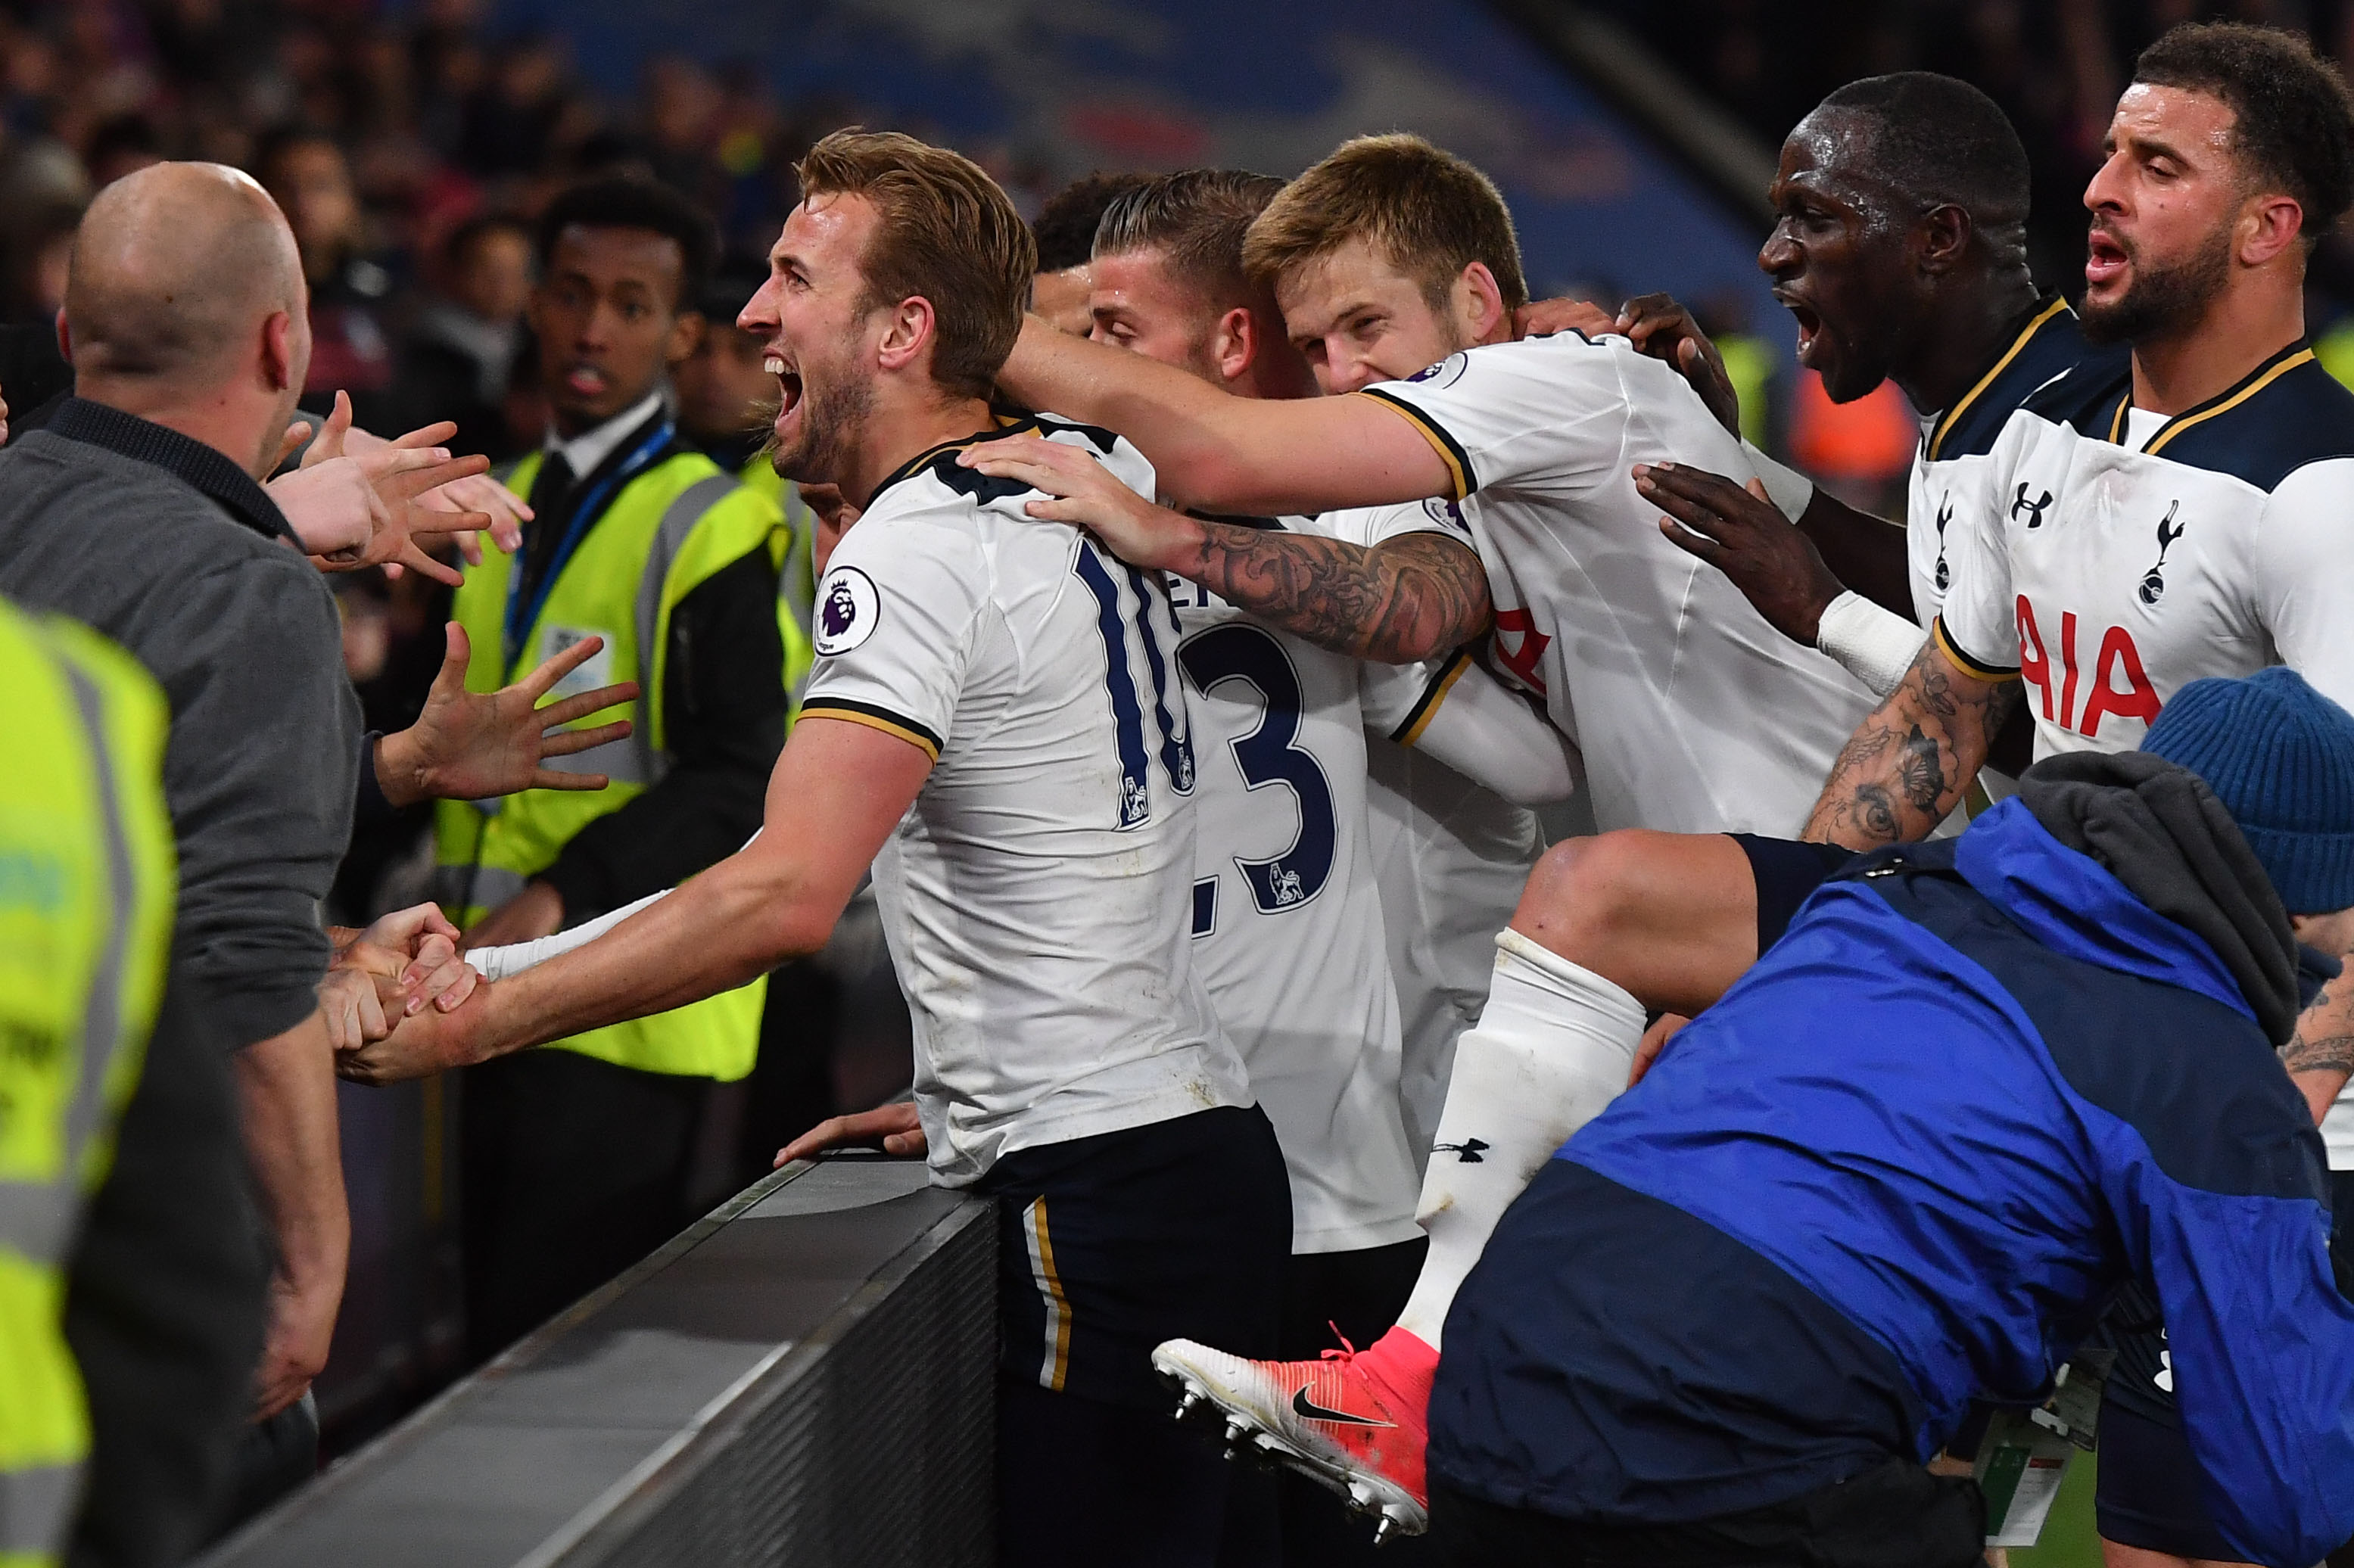 Tottenham Hotspur's Danish midfielder Christian Eriksen (C) celebrates scoring the opening goal with teammates and supporters during the English Premier League football match between Crystal Palace and Tottenham Hotspur at Selhurst Park in south London on April 26, 2017. / AFP PHOTO / Ben STANSALL / RESTRICTED TO EDITORIAL USE. No use with unauthorized audio, video, data, fixture lists, club/league logos or 'live' services. Online in-match use limited to 75 images, no video emulation. No use in betting, games or single club/league/player publications.  /         (Photo credit should read BEN STANSALL/AFP/Getty Images)